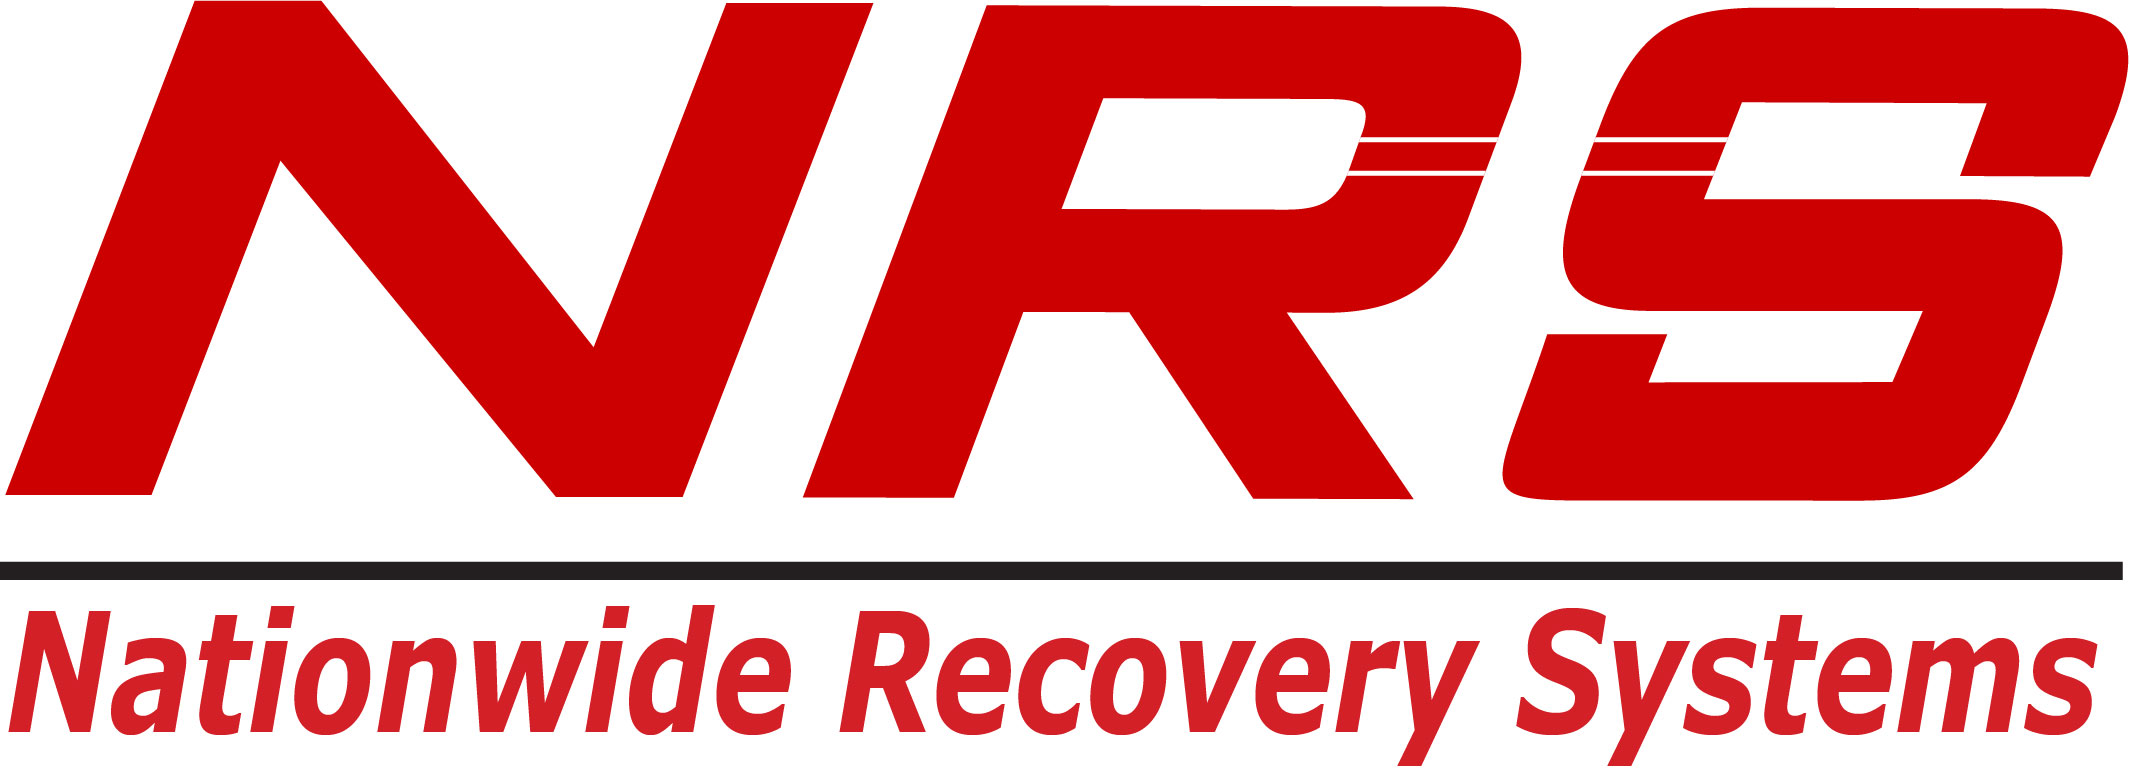 Nationwide Recovery Systems